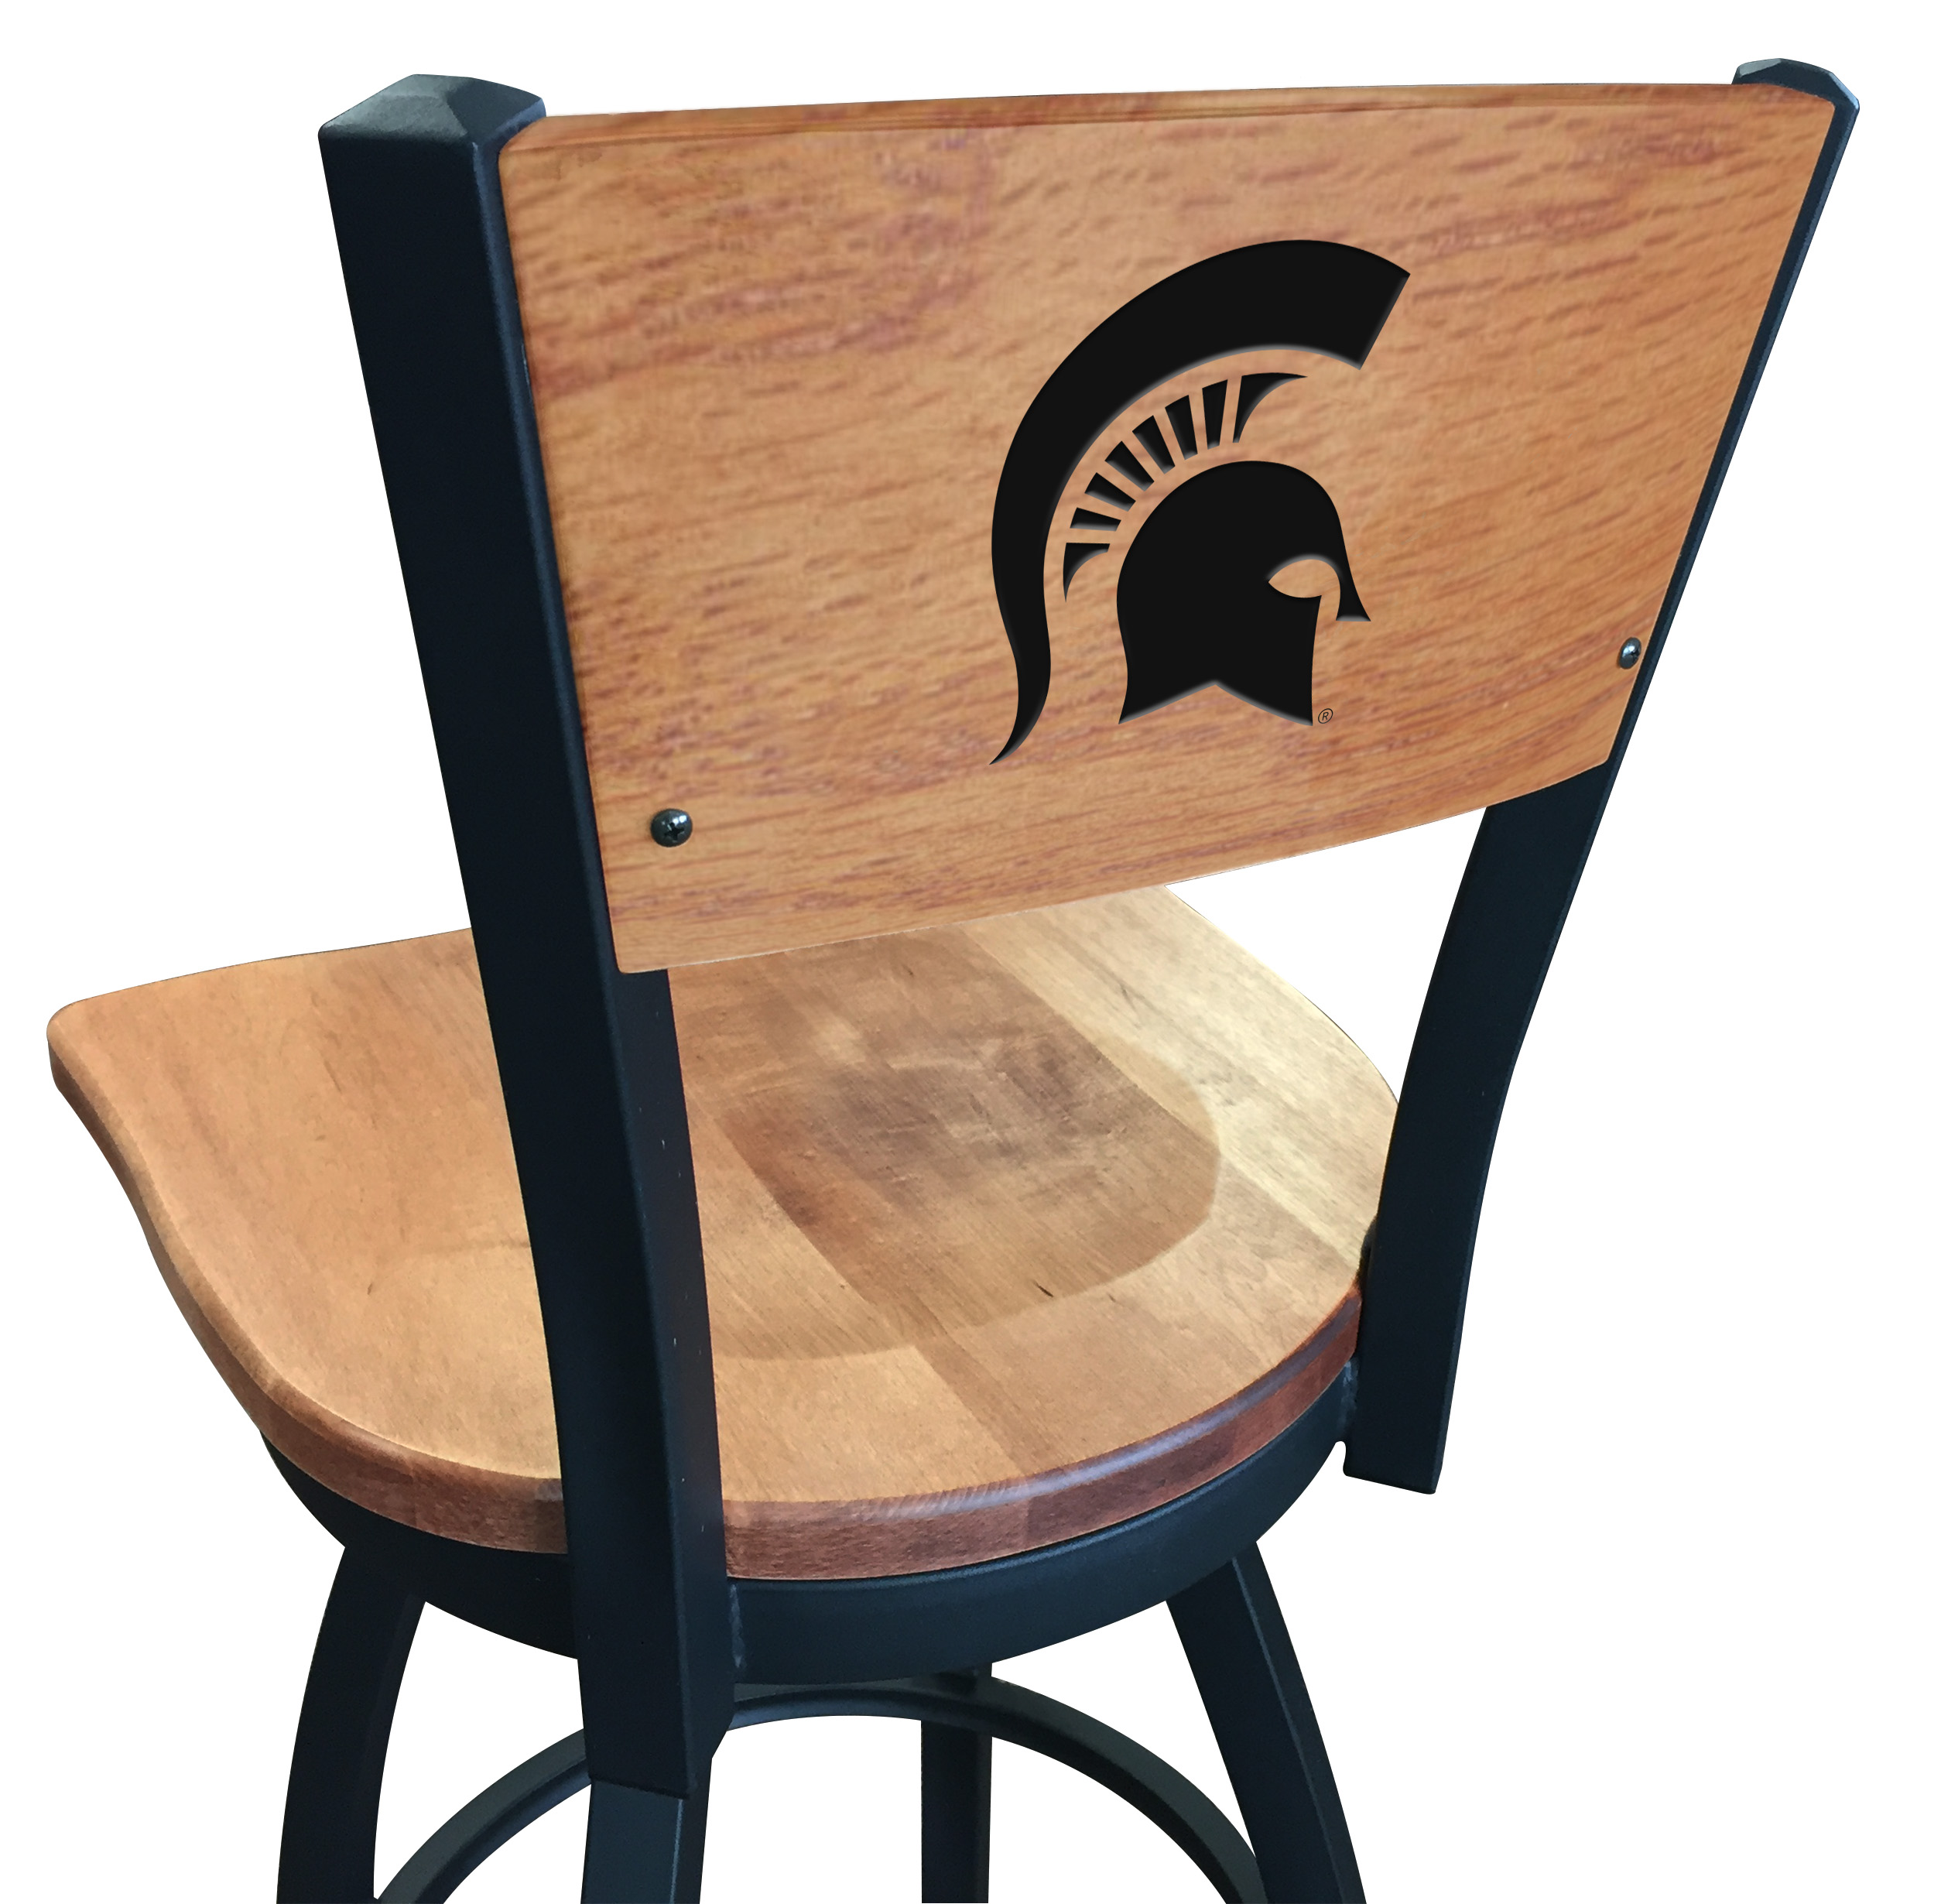 Picture of Holland Bar Stool L03830BWMedMplAMichStMedMpl 30 in. L038 - Black Wrinkle Michigan State Swivel Bar Stool with Laser Engraved Back